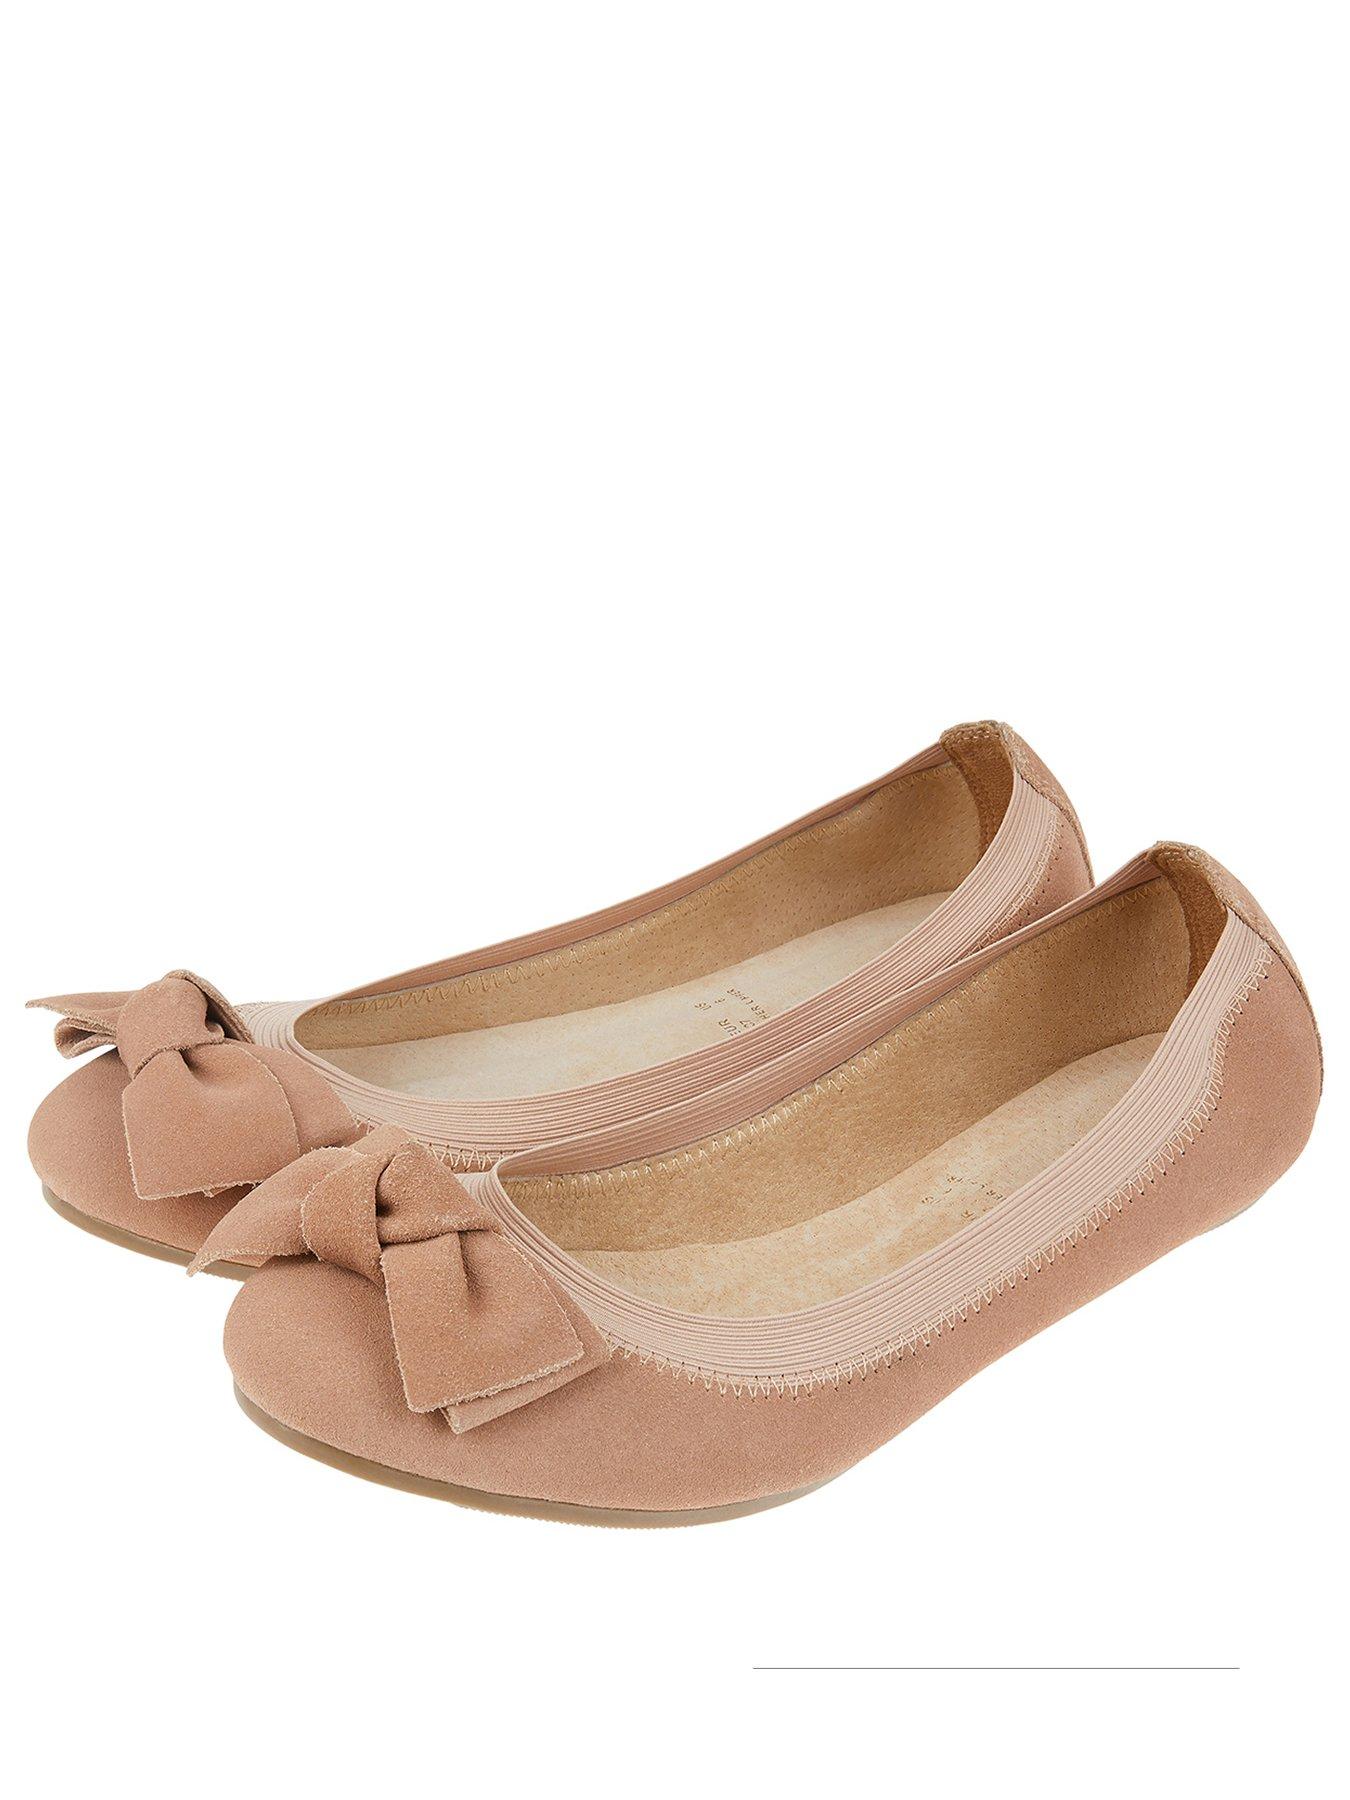 nude flats size 5